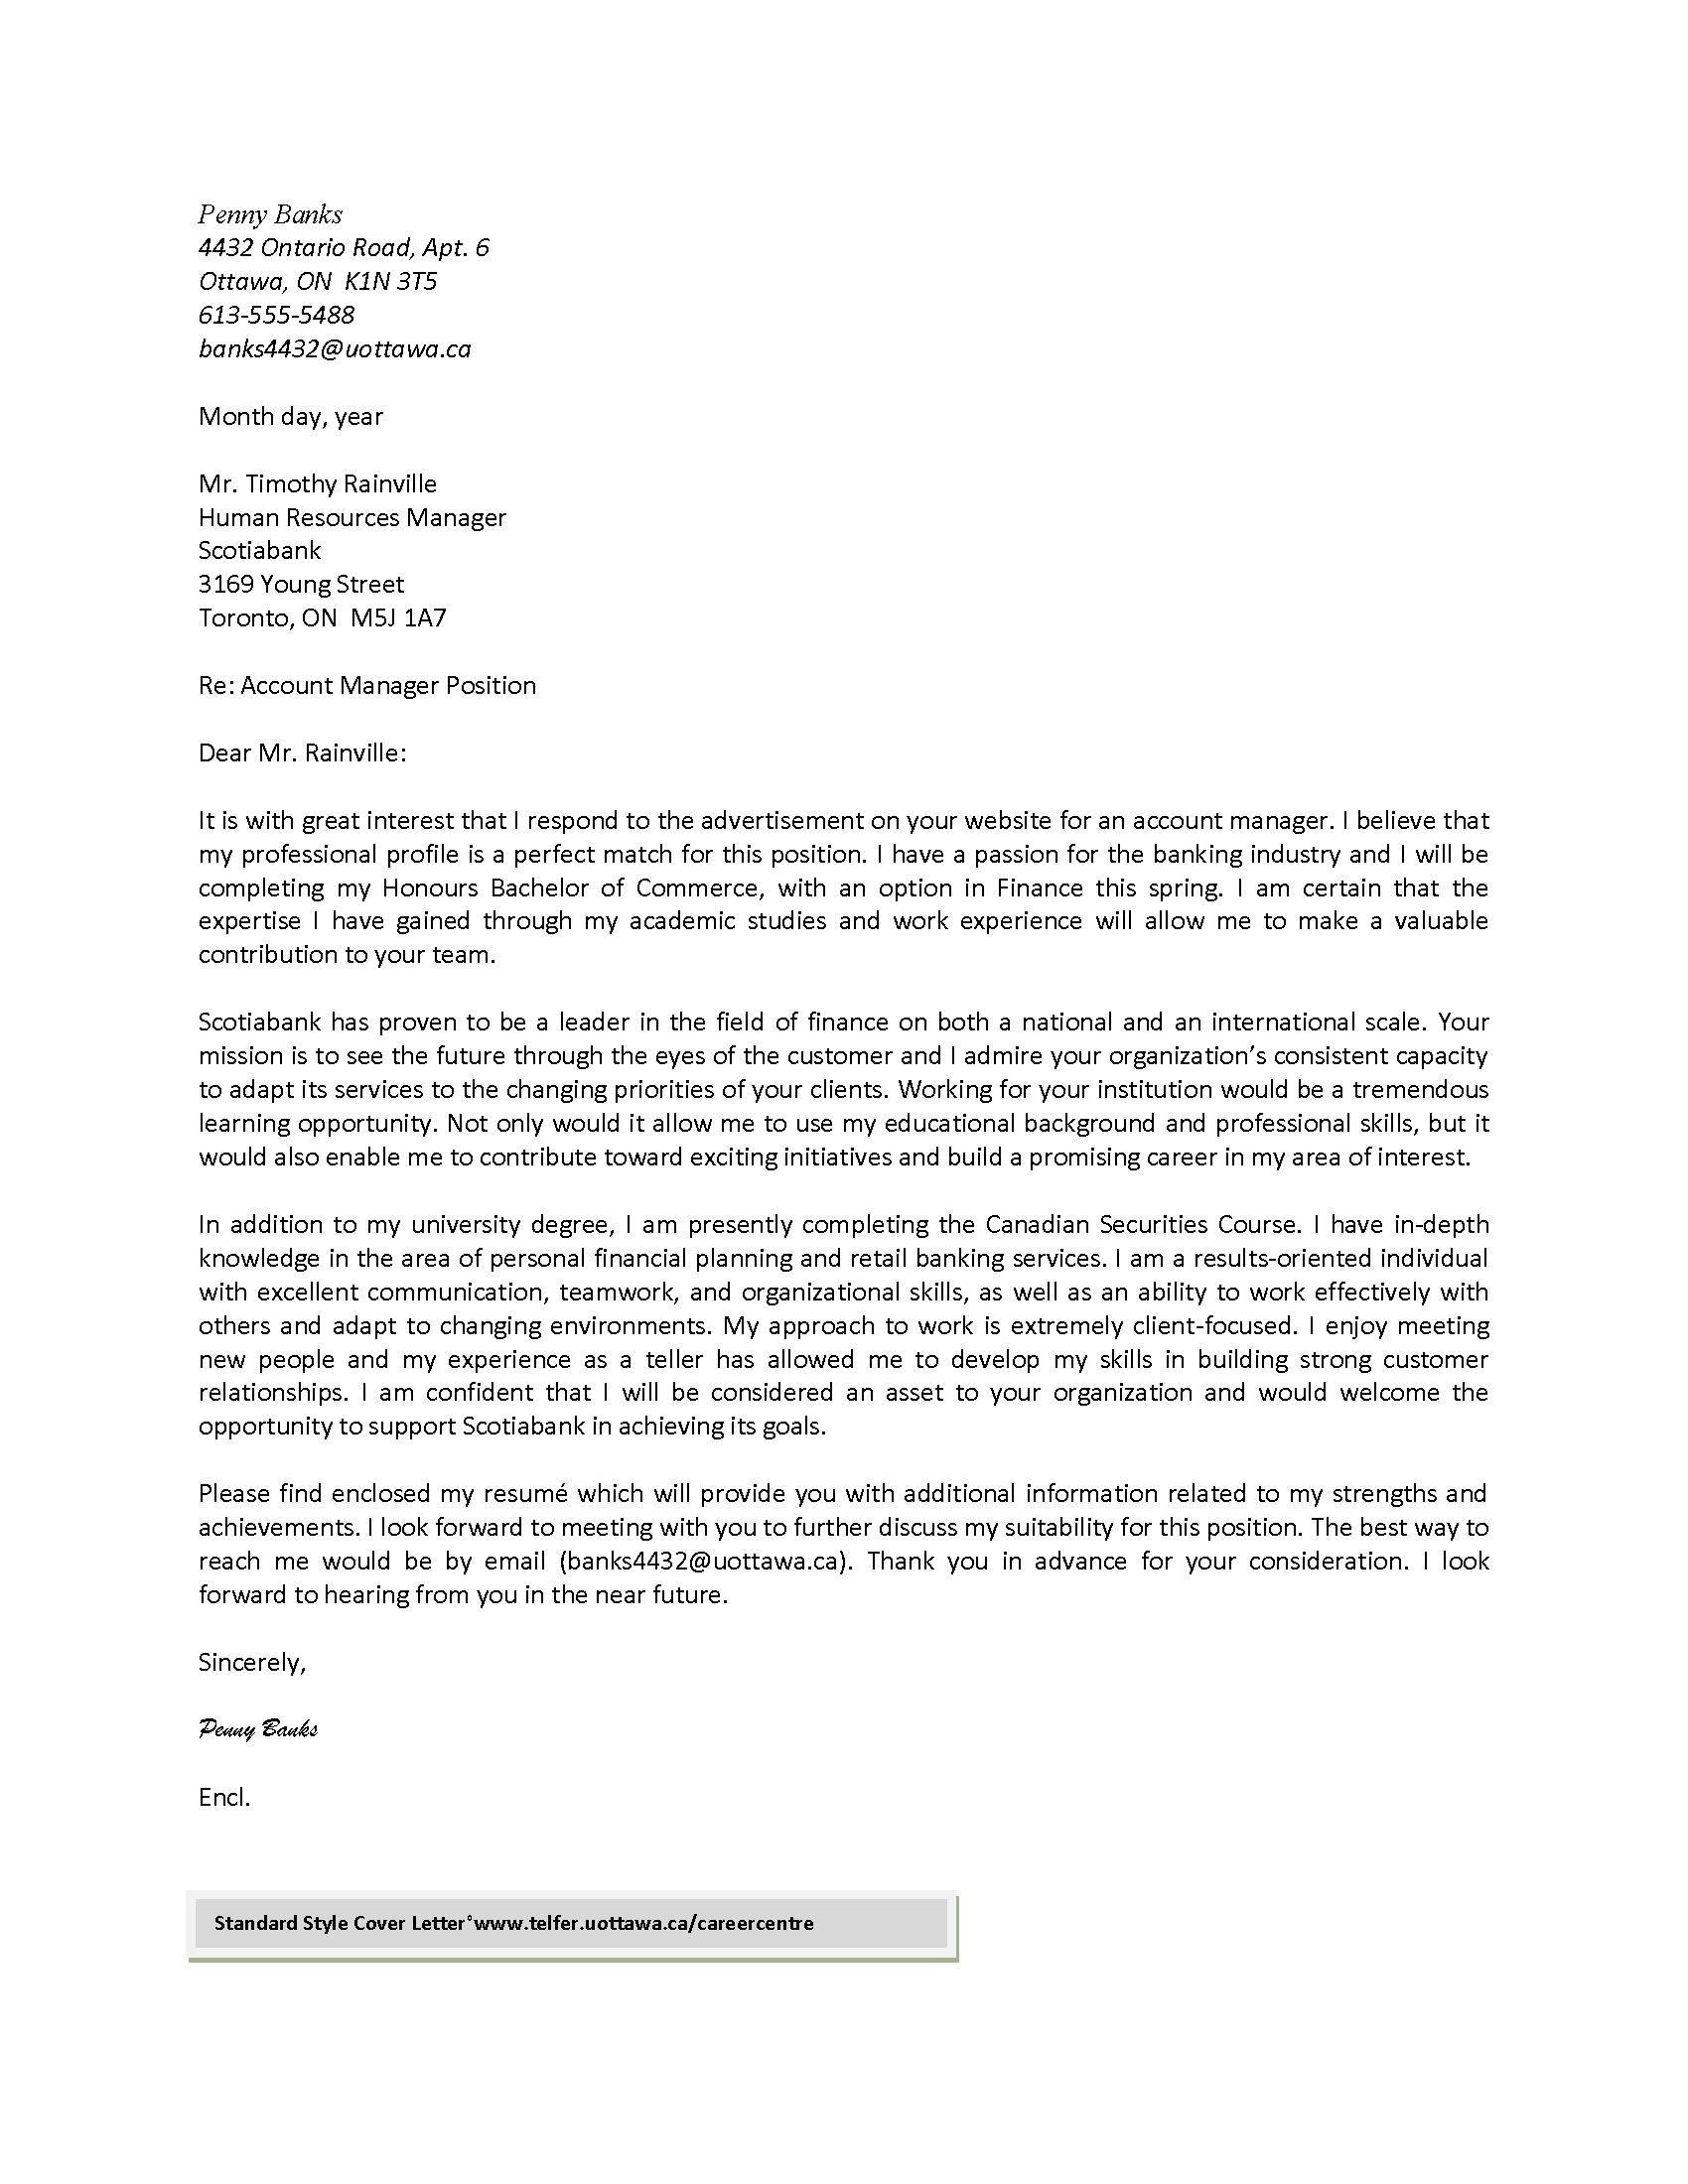 Cover Letter For Research Position Undergraduate from telfer.uottawa.ca